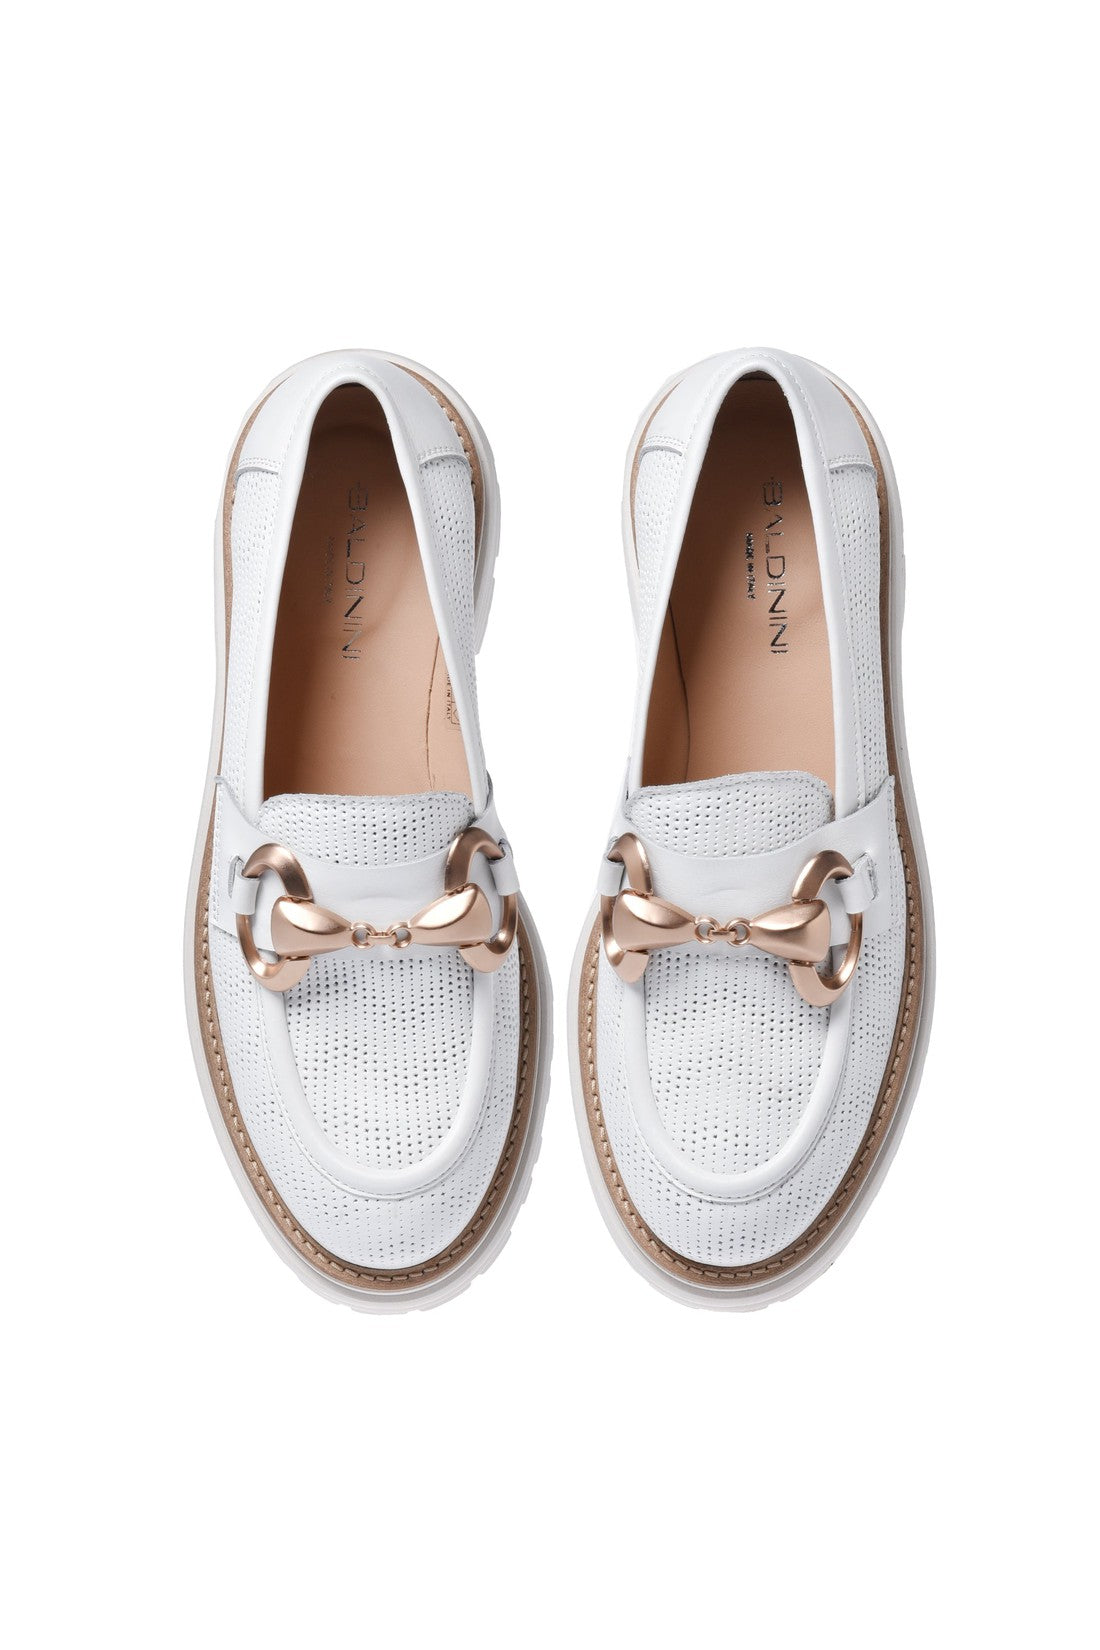 Loafer in cream perforated calfskin